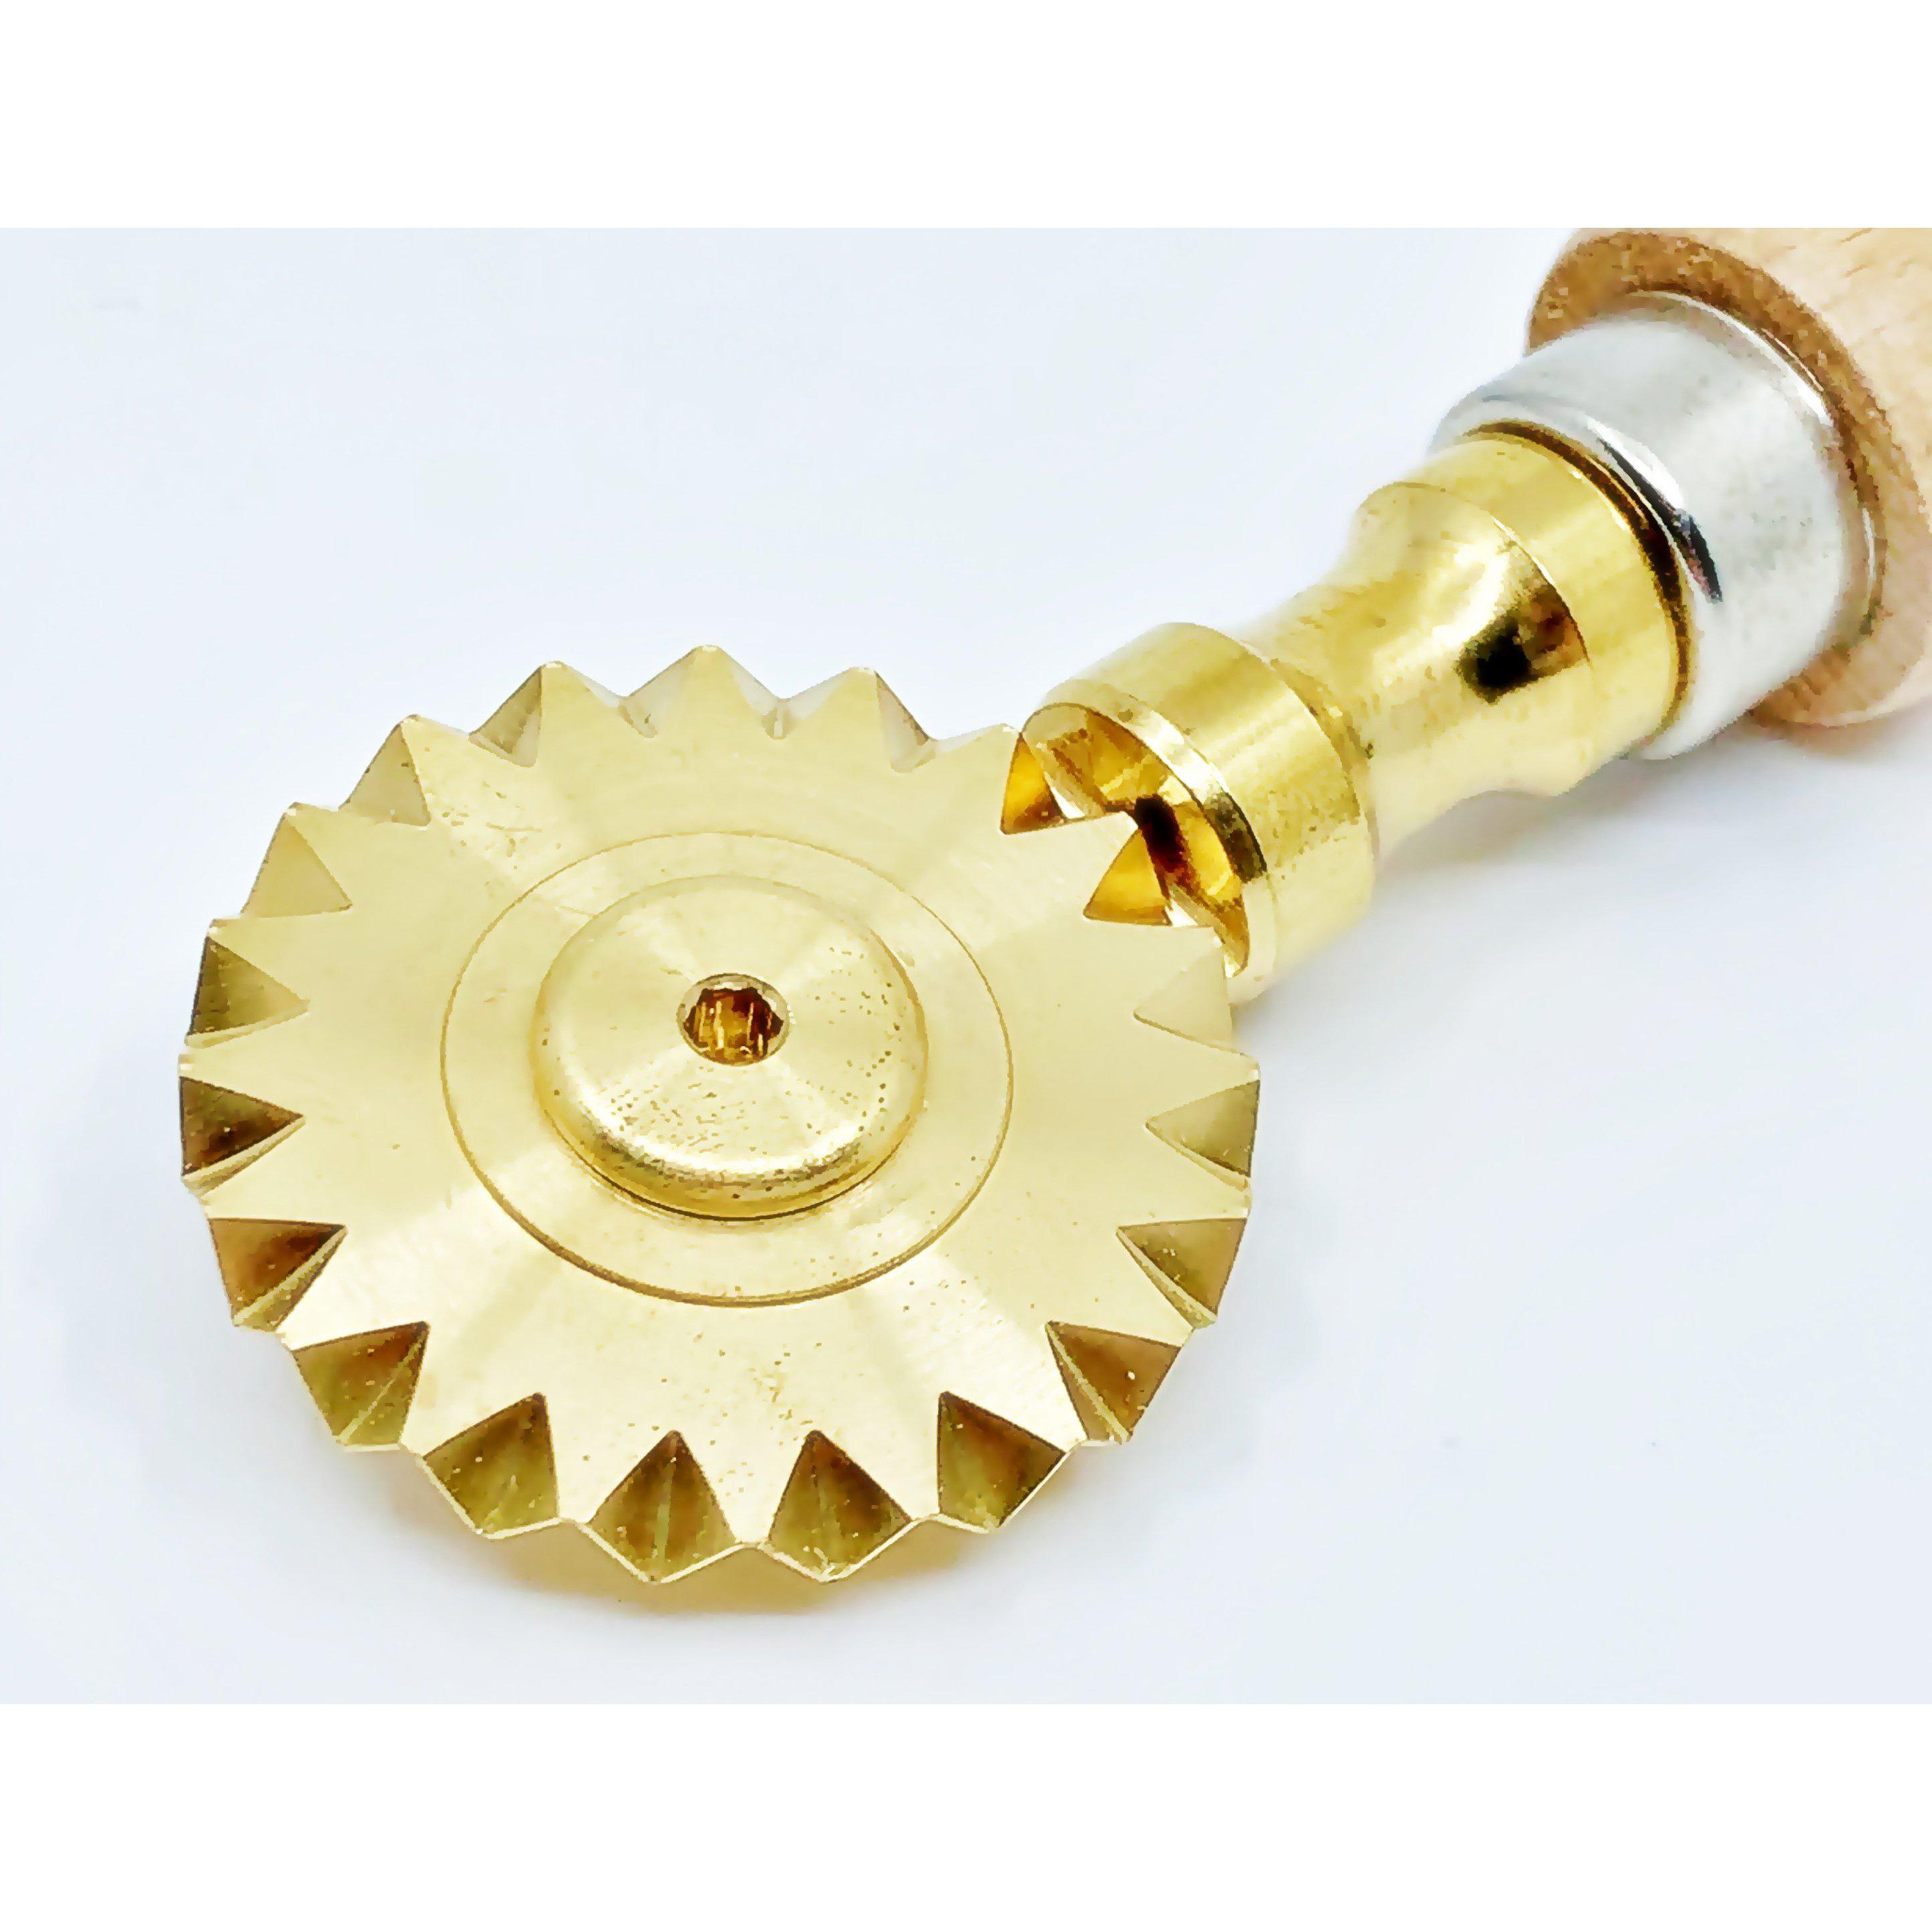 Professional Pasta Cutter Wheel, in Brass and Natural Wood – ZelliPasta